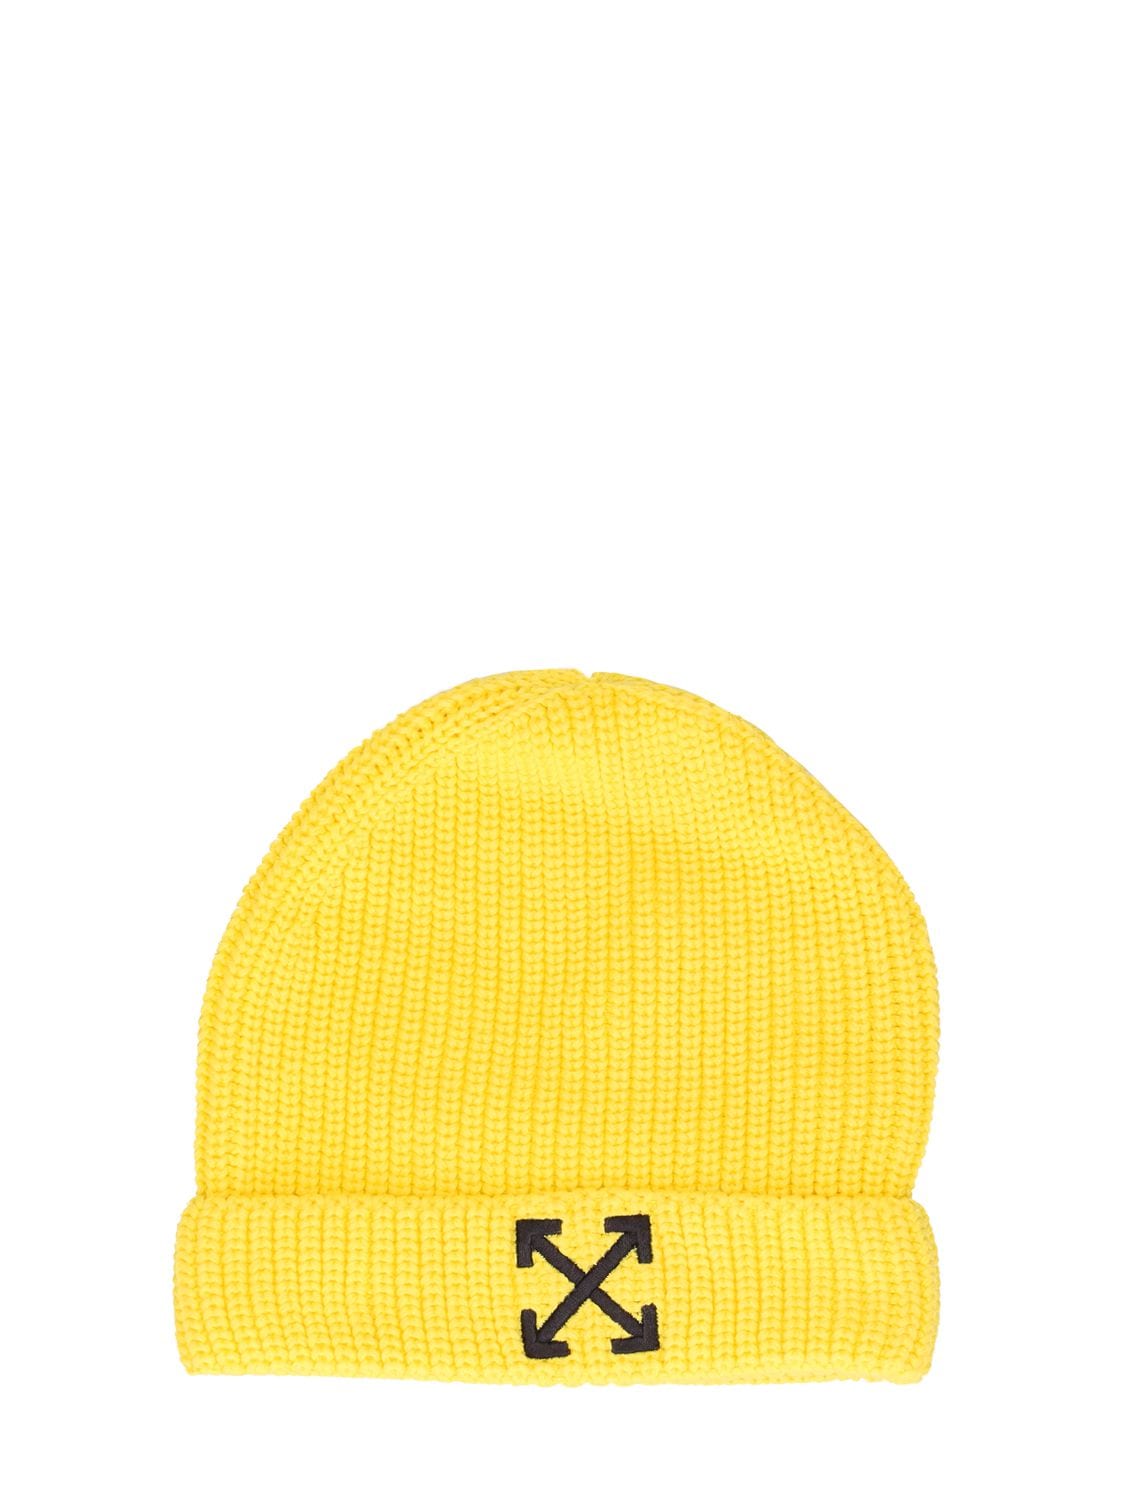 OFF-WHITE EMBROIDERED LOGO COTTON BEANIE HAT